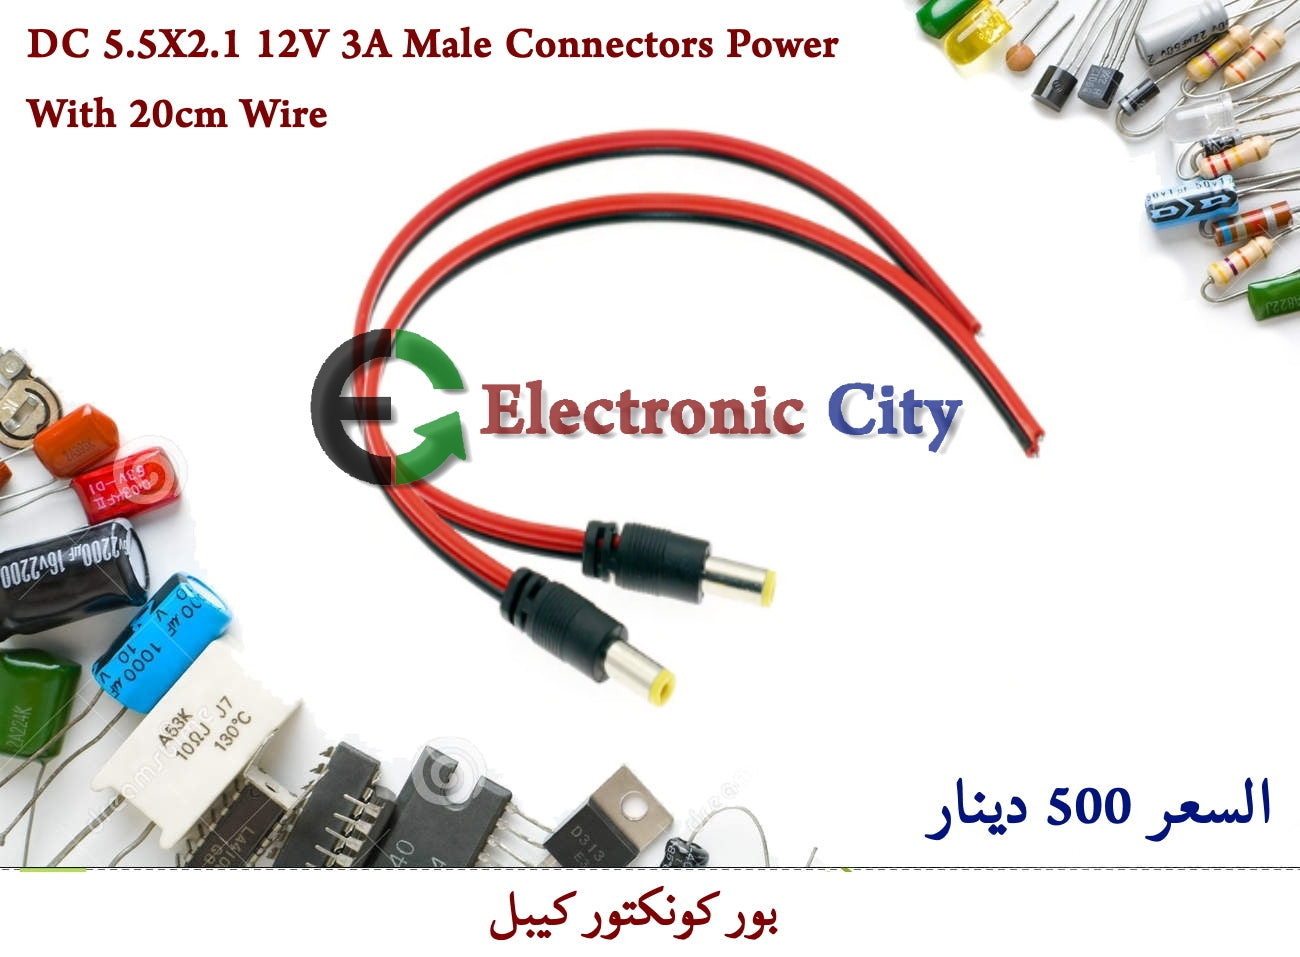 DC 5.5X2.1 12V 3A Male Connectors Power with 20cm Wire #C12  011202